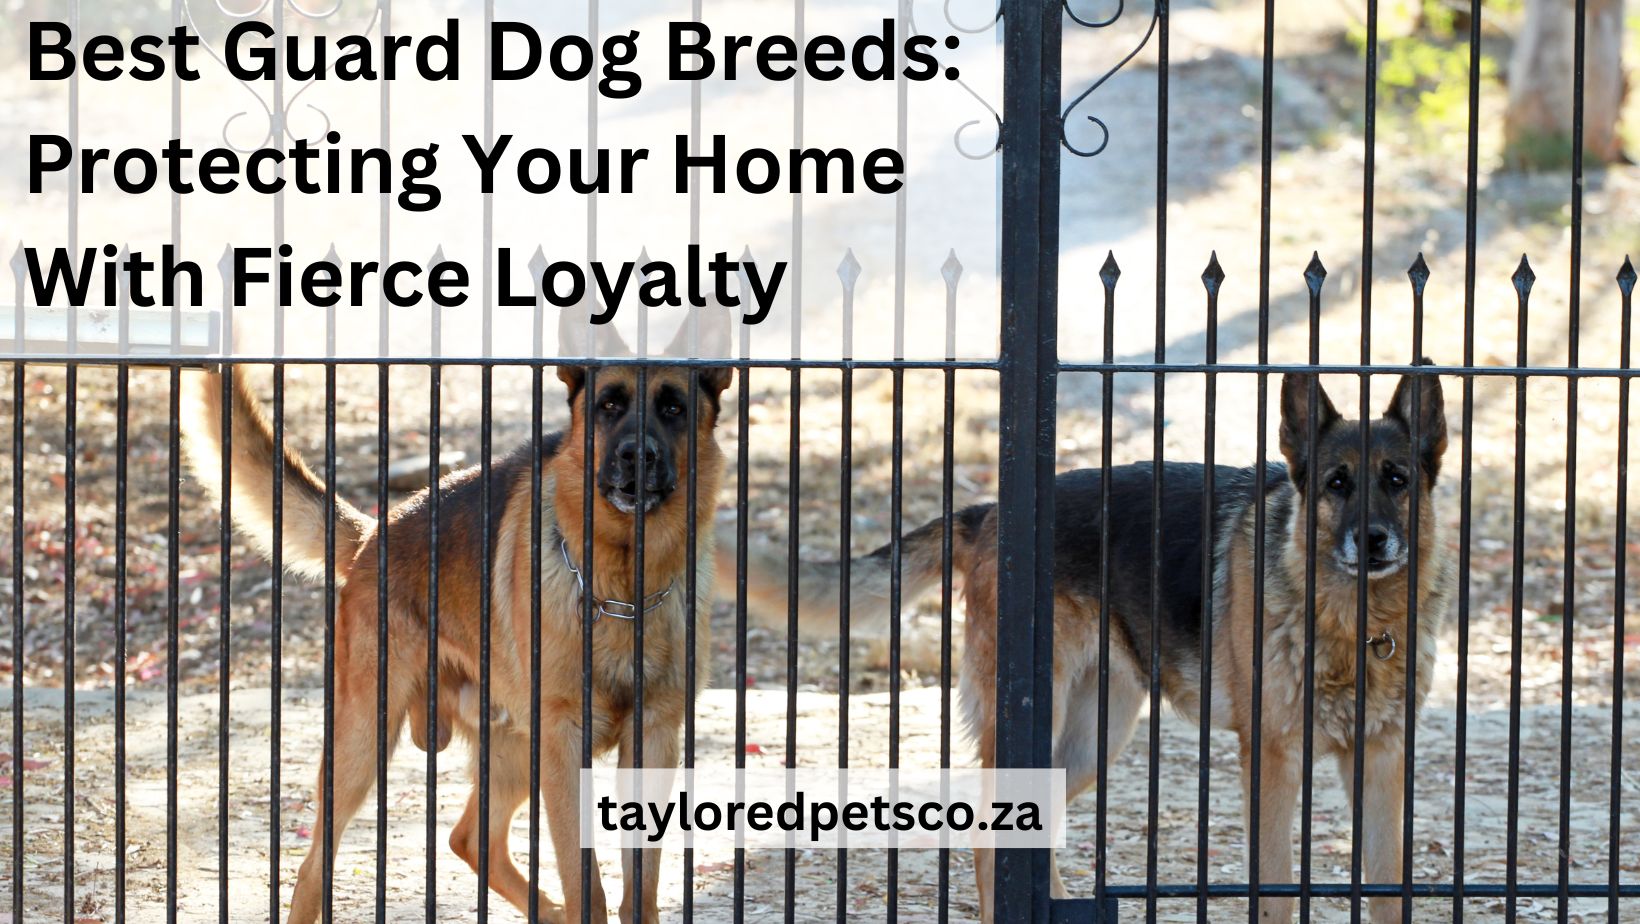 The Best Guard Dog Breeds